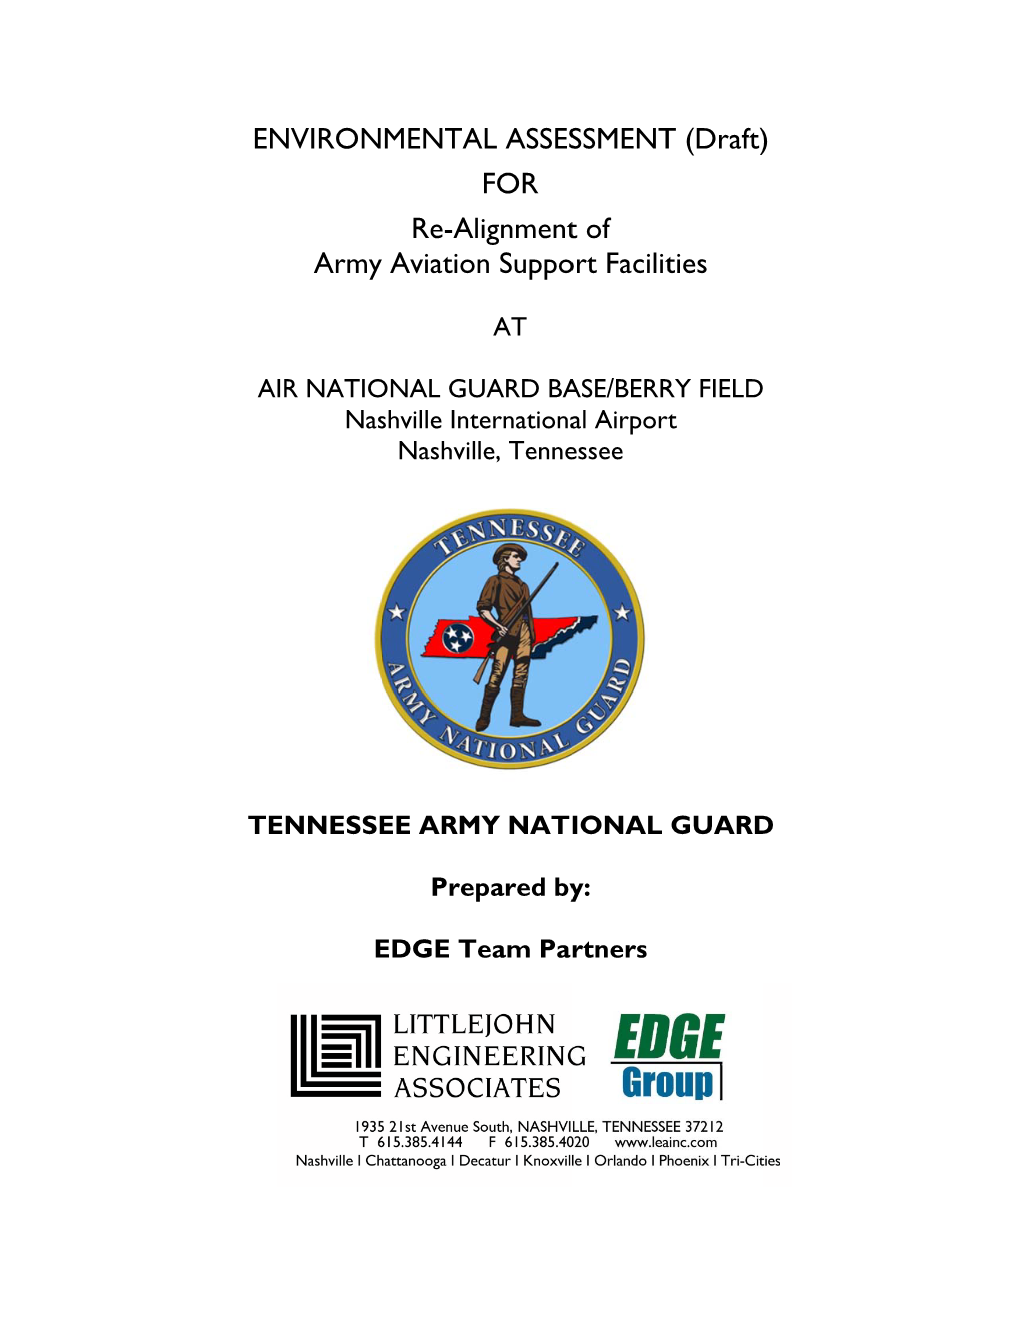 ENVIRONMENTAL ASSESSMENT (Draft) for Re-Allignment of Army Aviation Support Facilities